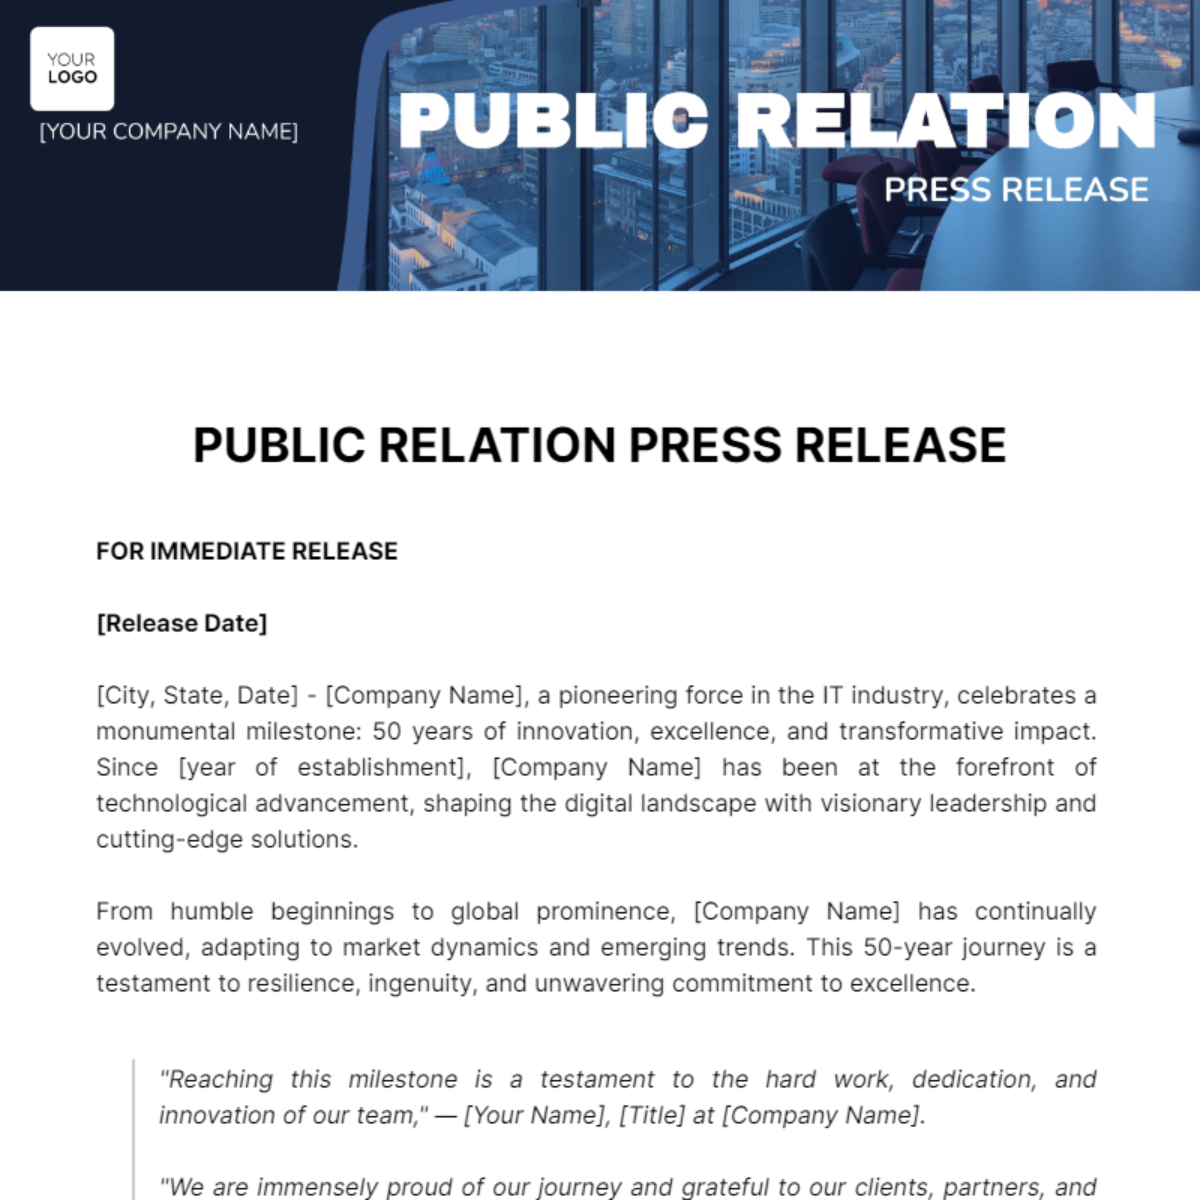 Public Relations Press Release Template